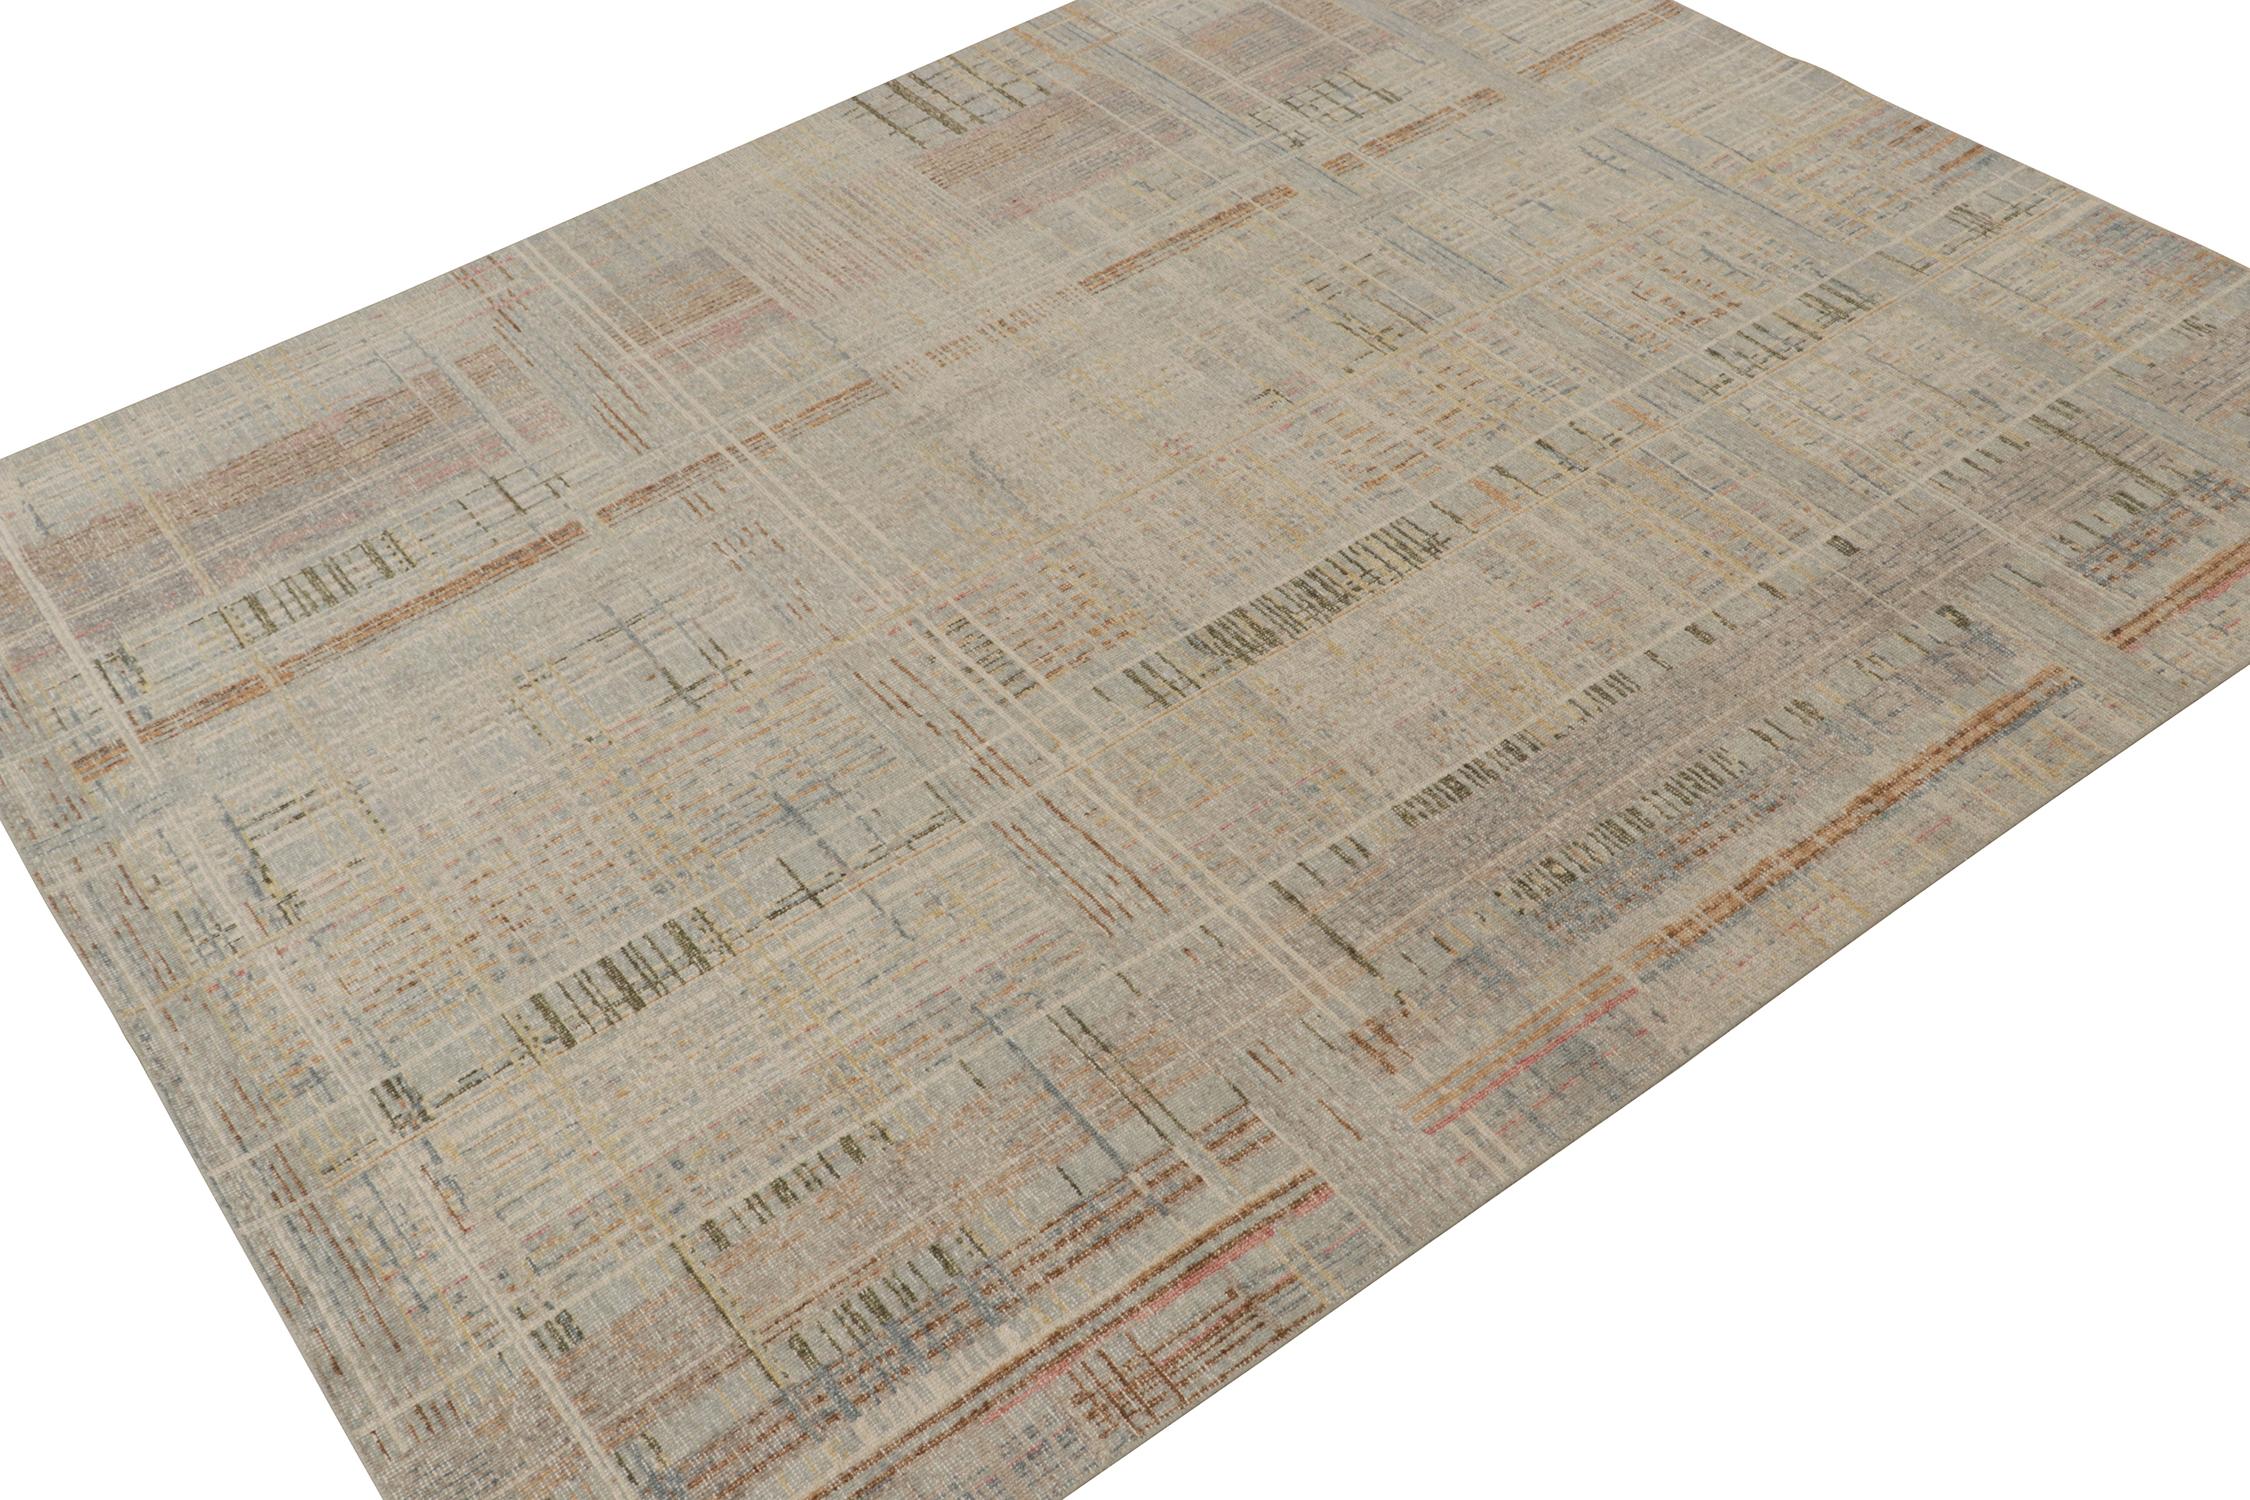 An 8x10 abstract rug, hand-knotted in distressed style wool and cotton from Rug & Kilim’s Homage Collection.

Further on the Design:

This design enjoys geometric patterns in tones of beige-brown, blue and gray that favor a brilliant, layered look.